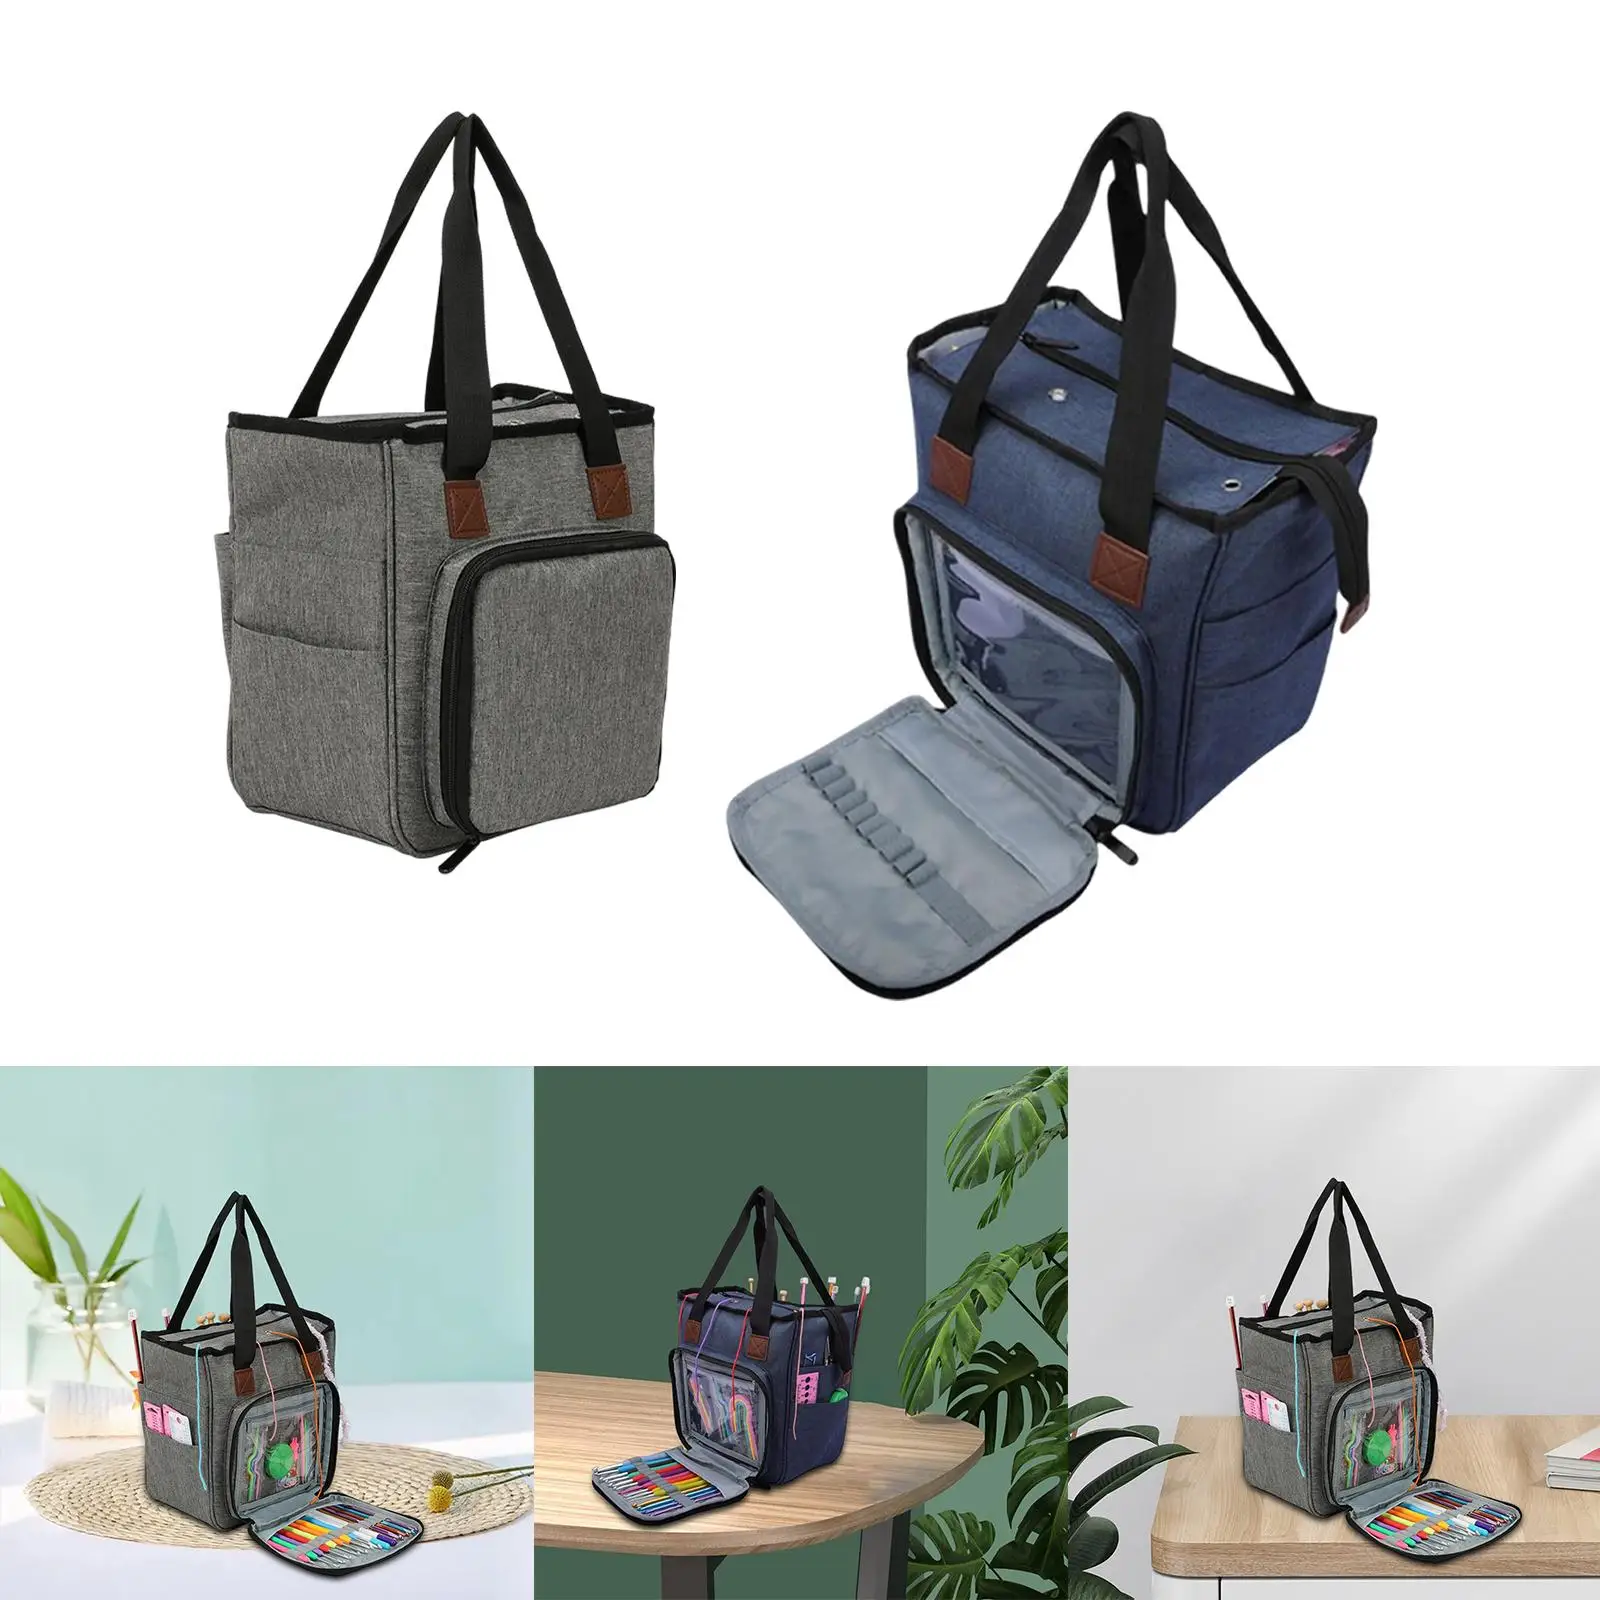 Portable Knitting Bag Organizer Carrying Storage Bag Pouch Tote for Manuals Thread Yarn Sewing Accessories Travel Household